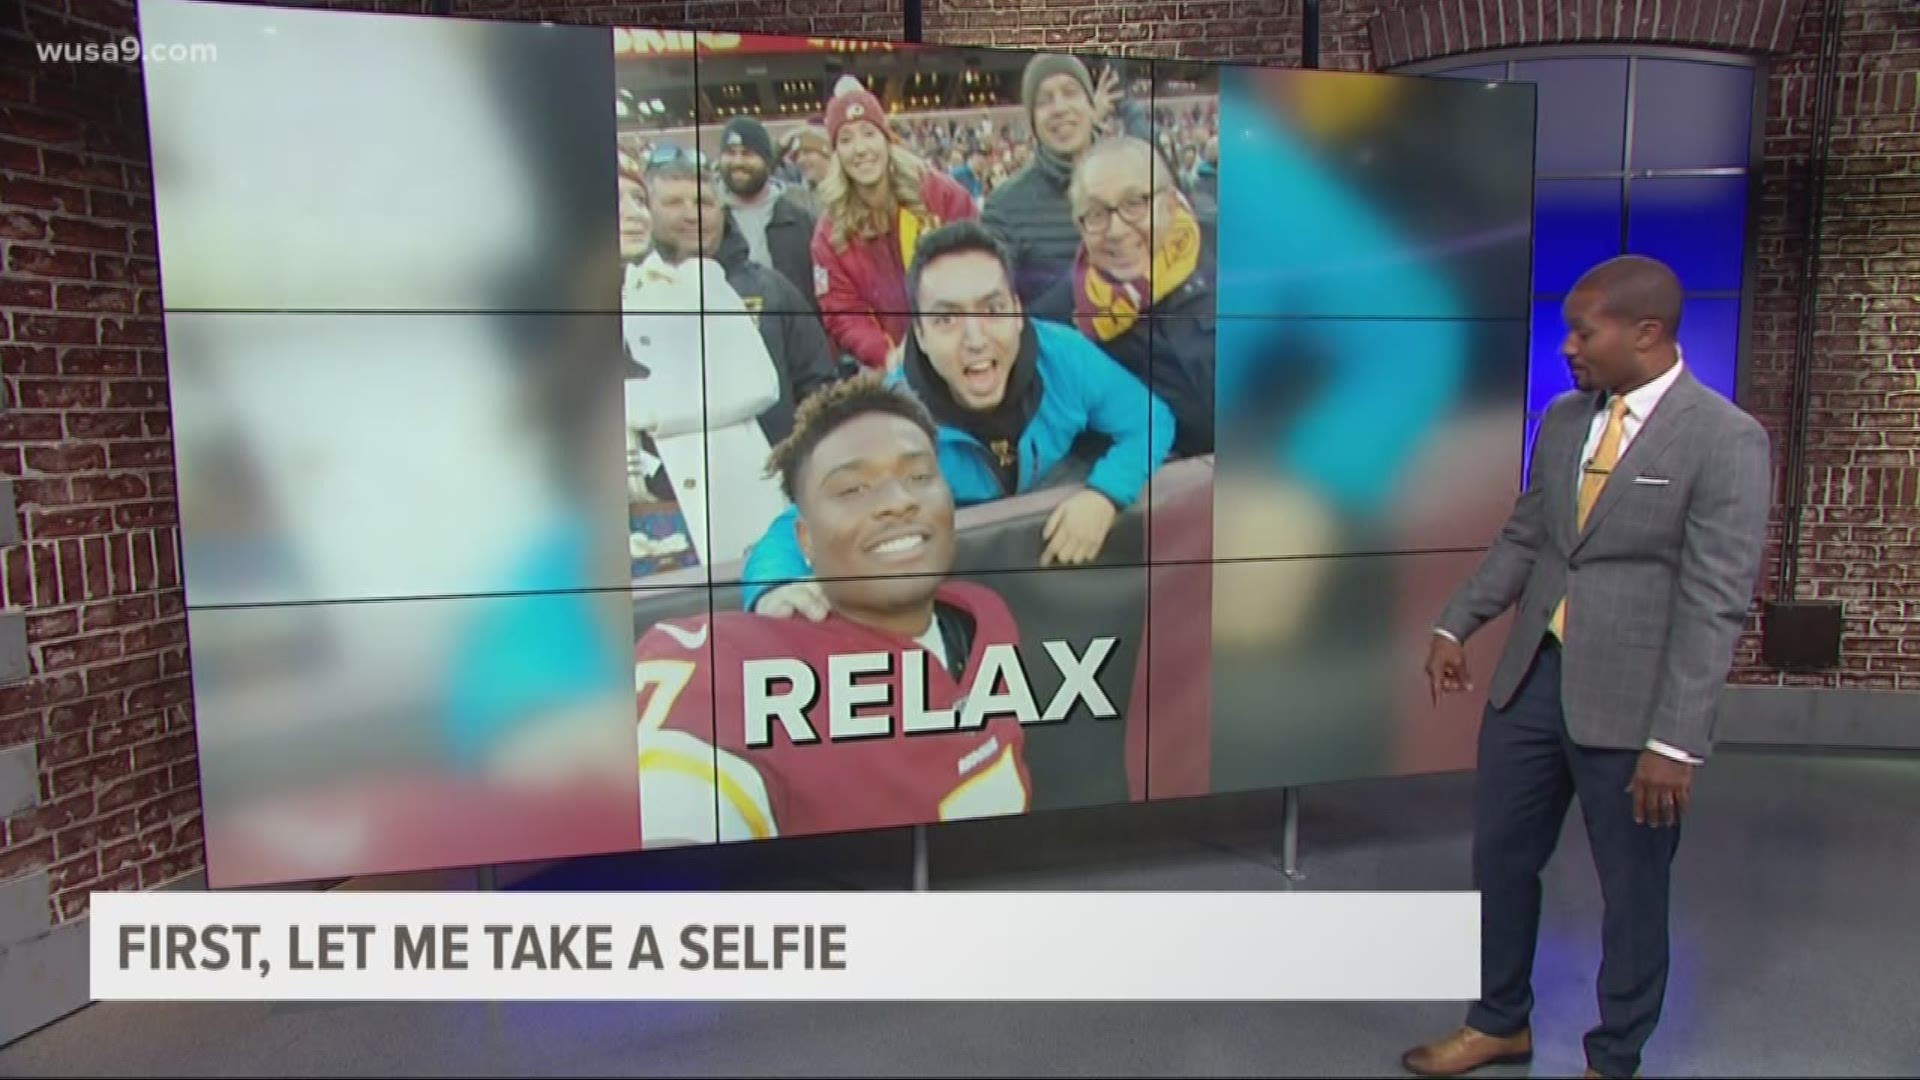 Opinions are split on Redskins Quarterback snapping a selfie with fans before the end of the game.